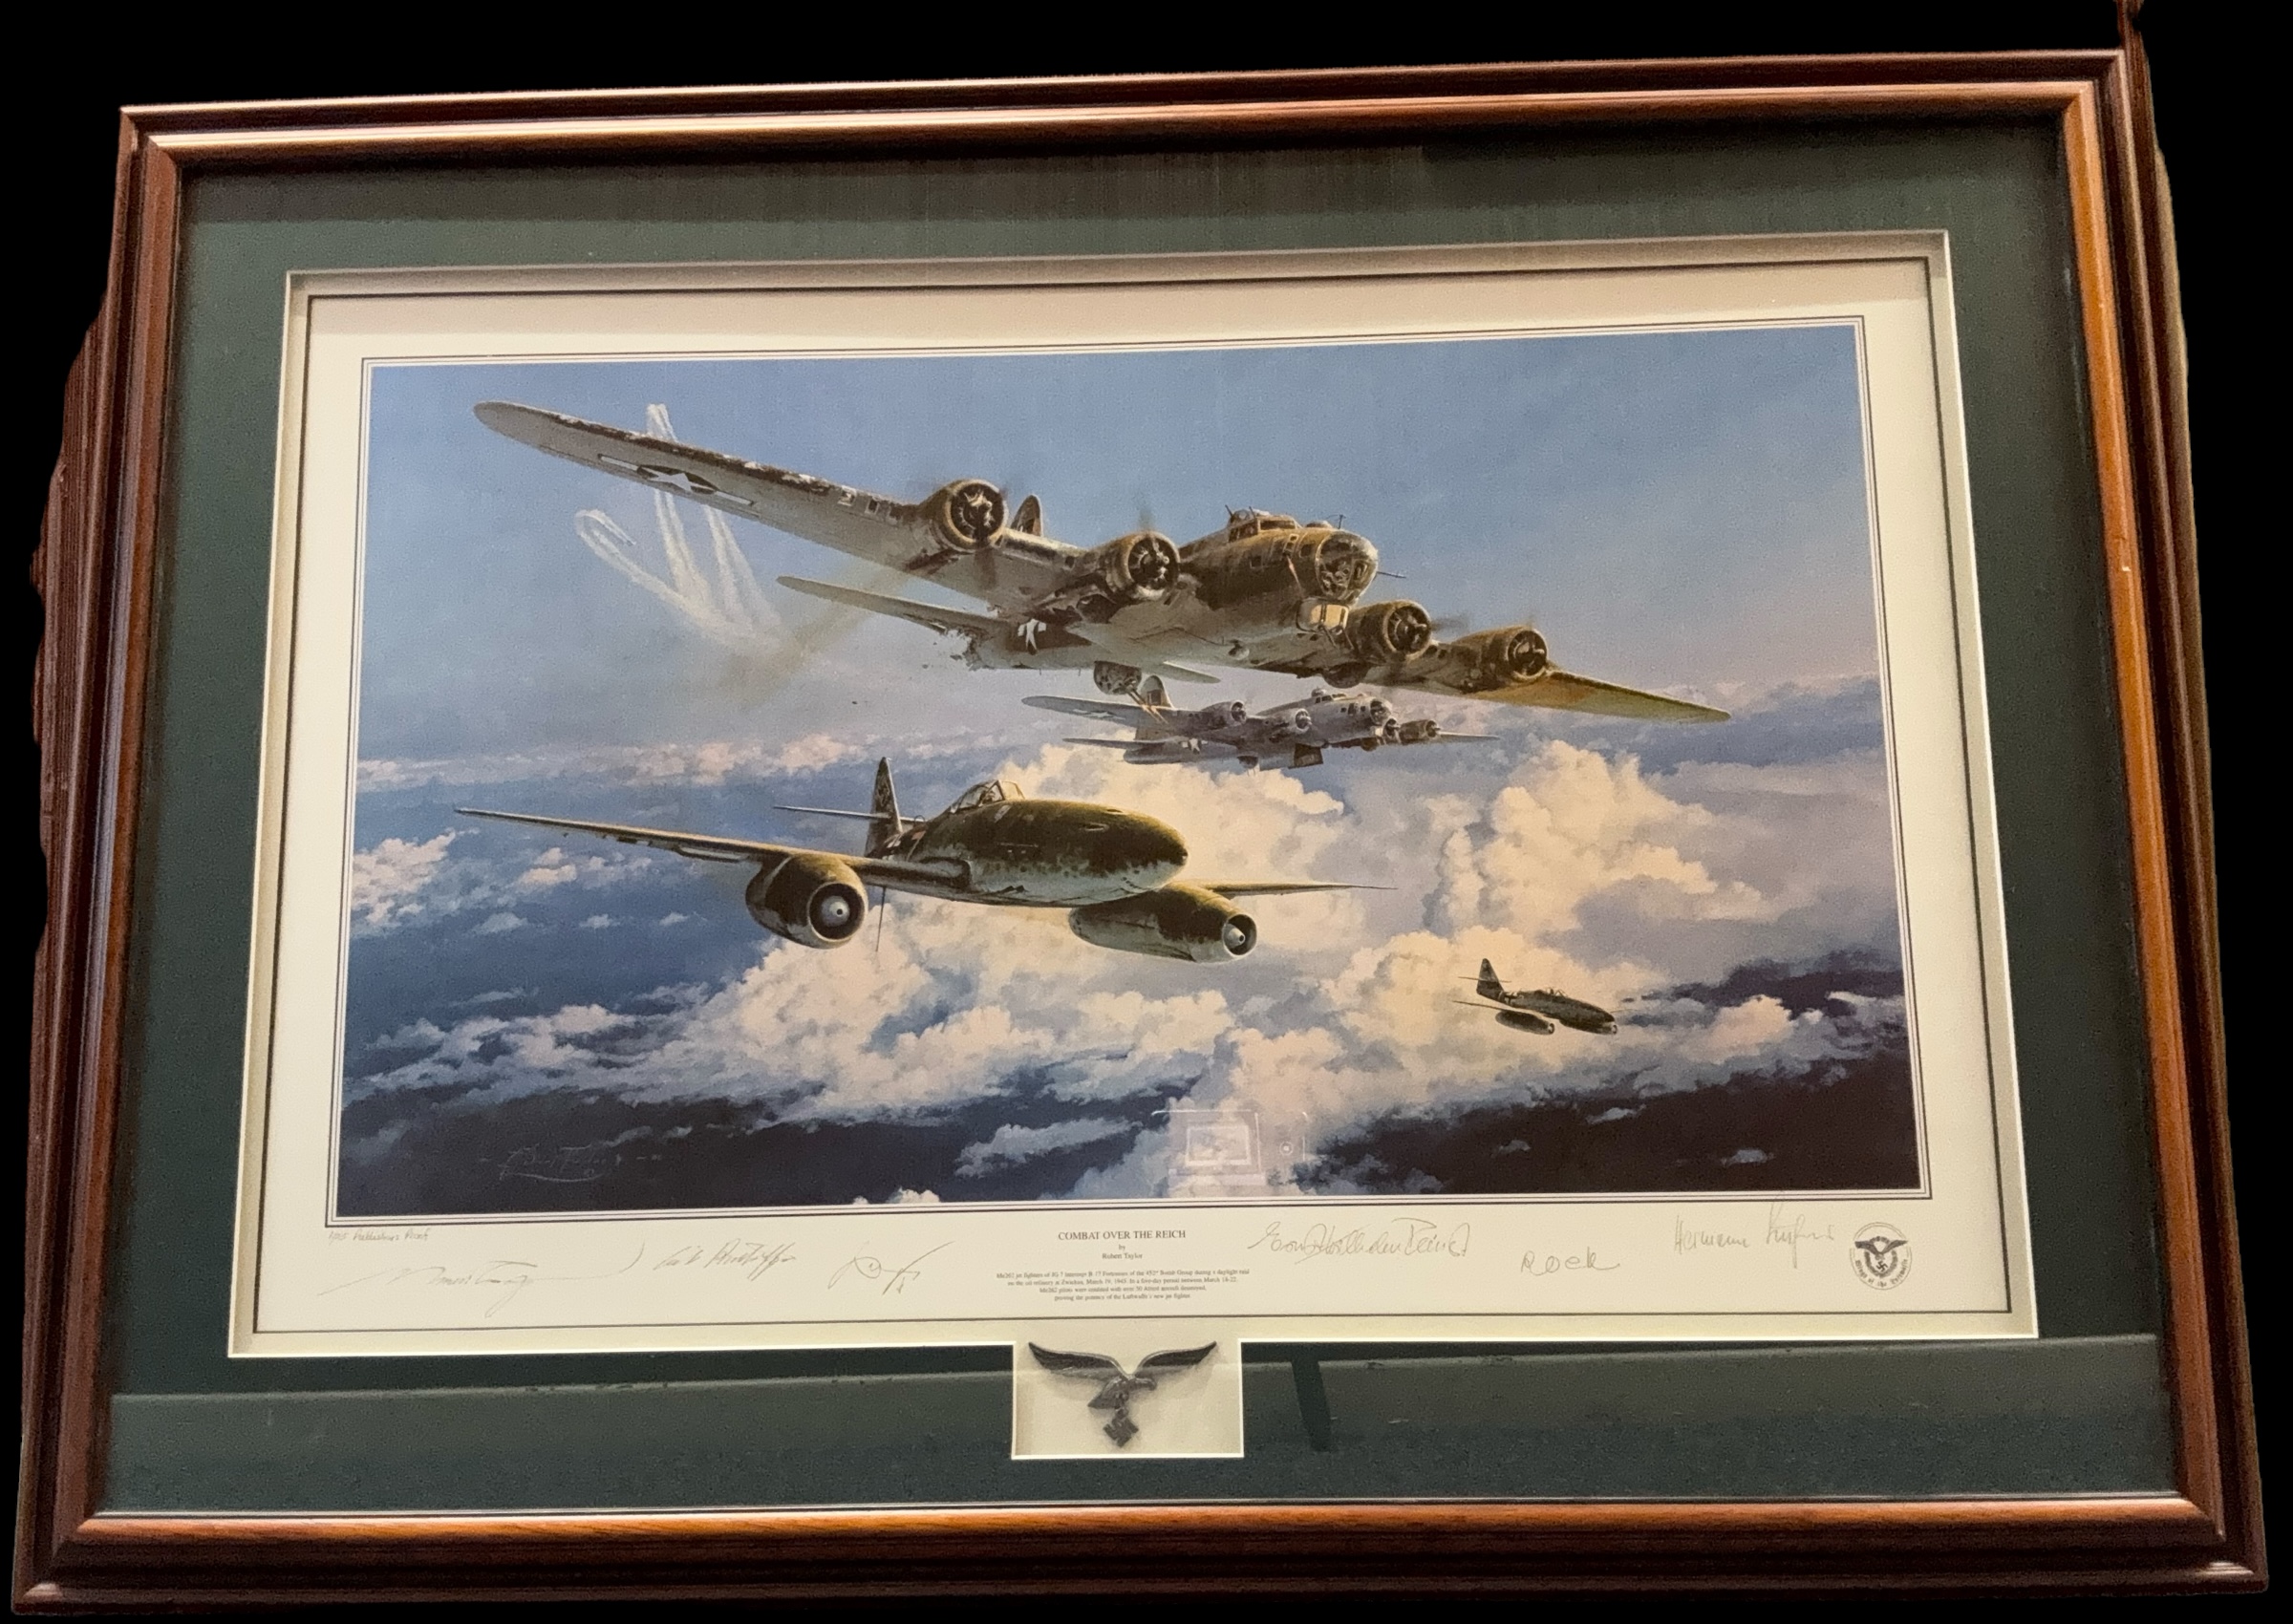 Combat Over the Reich WWII multi signed print 38x28 inch framed and mounted signed in pencil by - Image 2 of 3